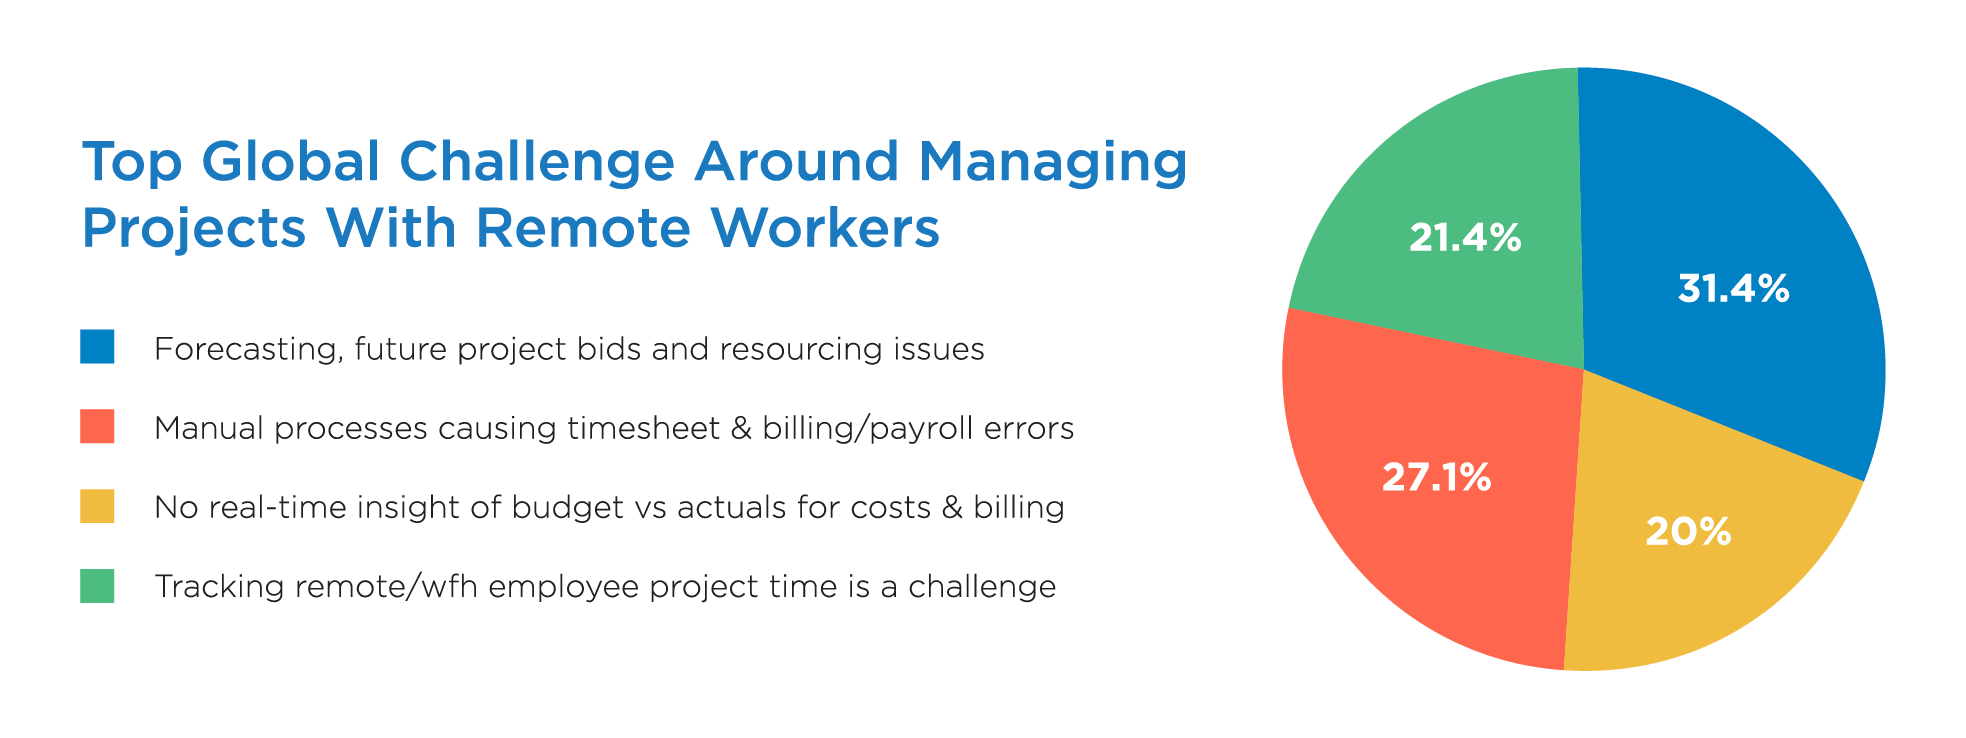 WFH employee project time tracking